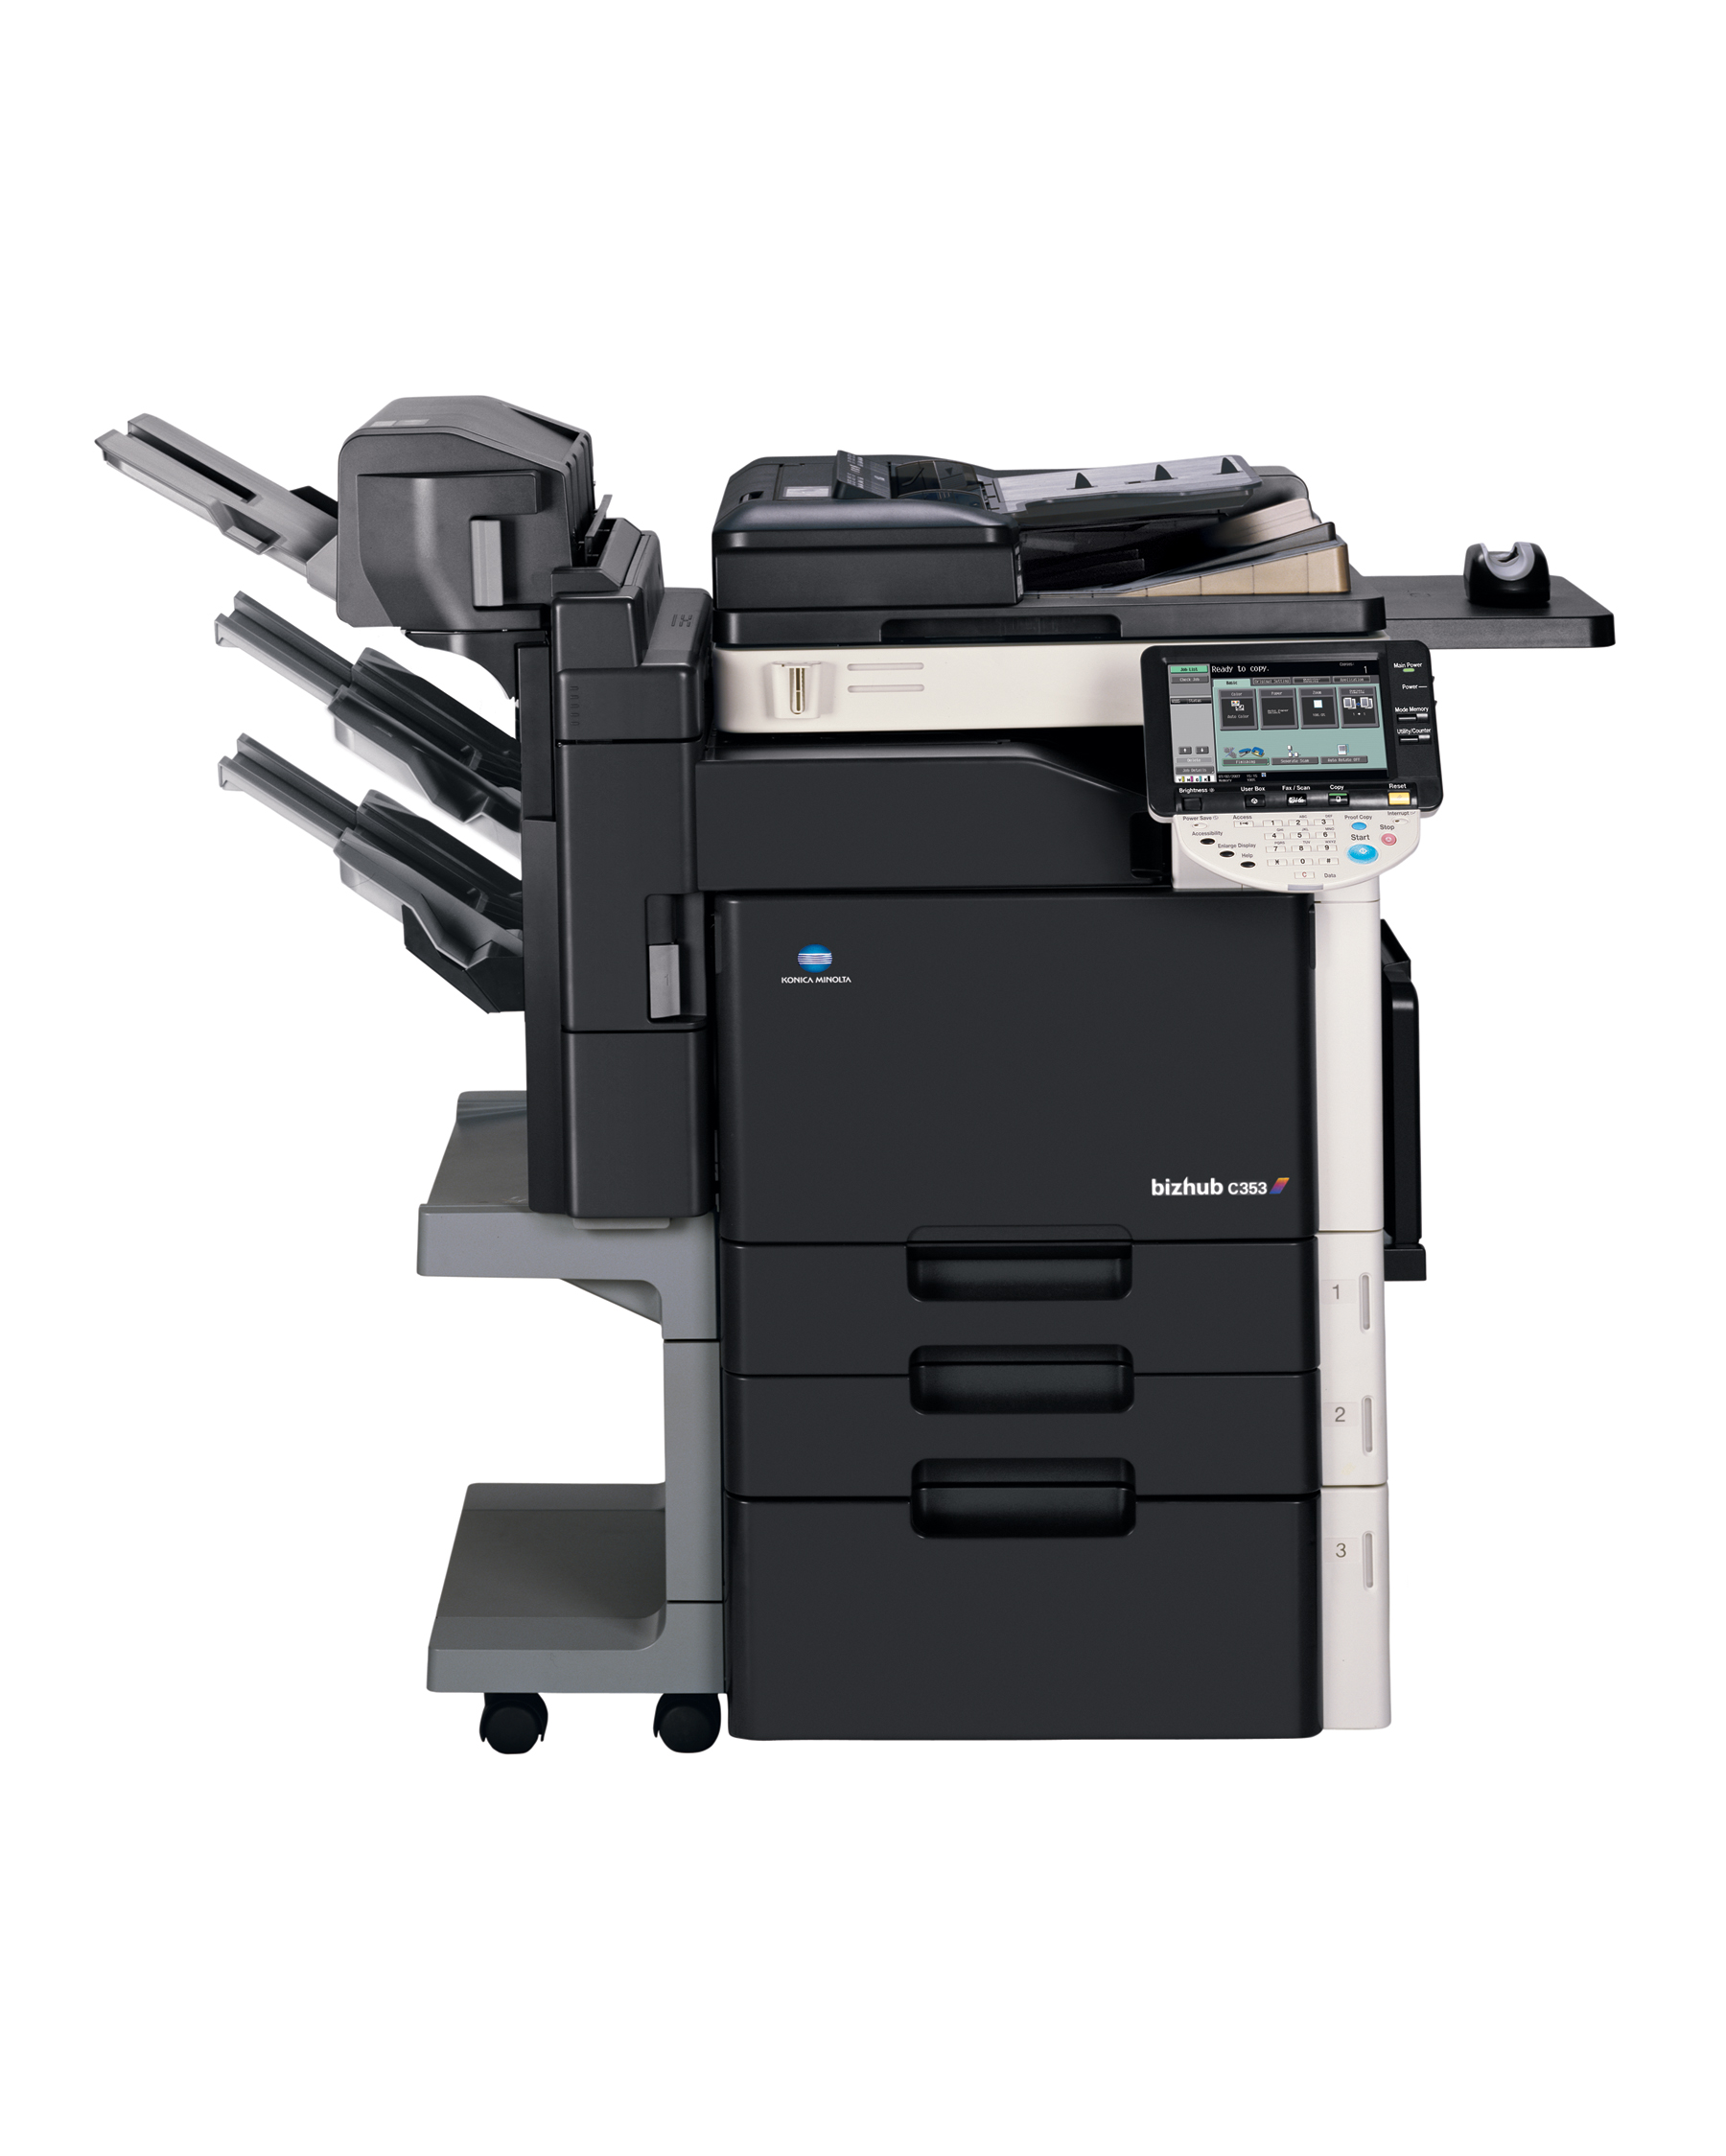 Konica Minolta to Unveil MFP Security and Document Control Solution at